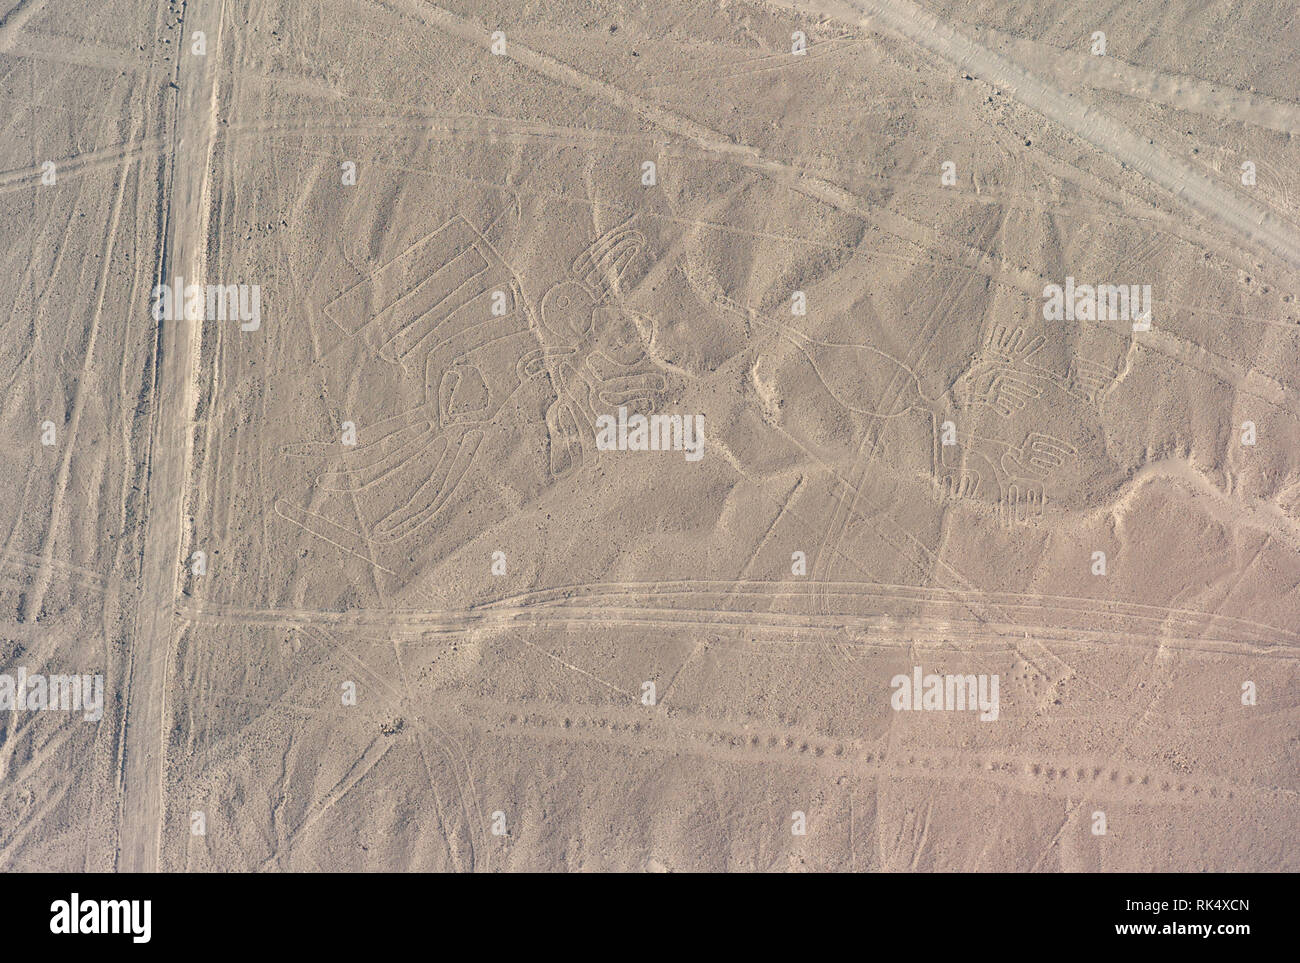 Aerial photo of the Mysterious the Pelican, also called the Alcatraz, Geoglyph and a Phytomorphic Glyph, Nazca Lines Unesco World Heritage Site, Peru Stock Photo